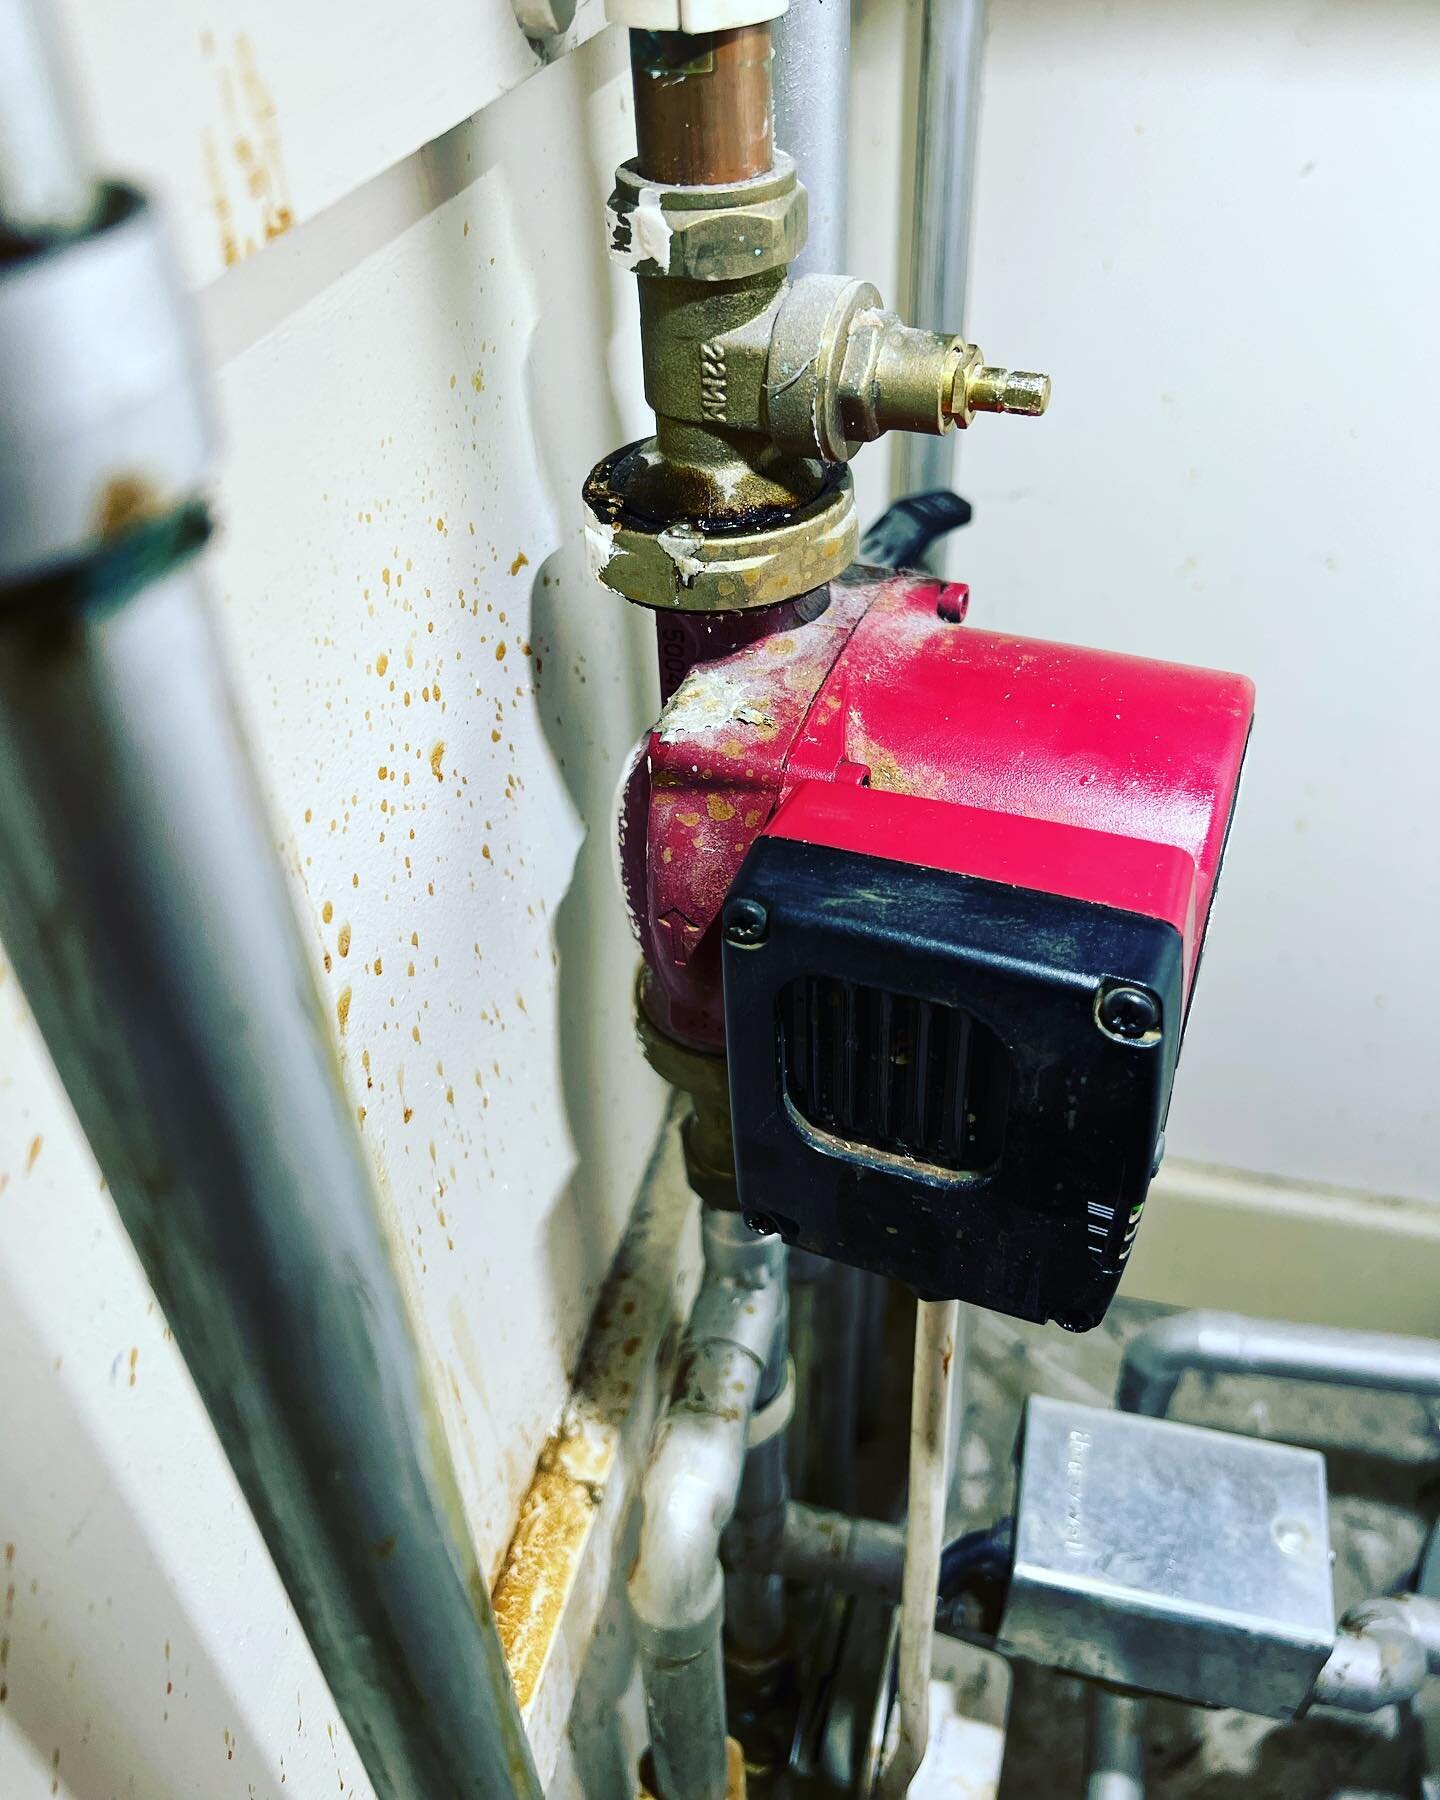 #saturdaycallouts #heatingengineer Had a customer today that&rsquo;s had this pump running for over ten years in the wrong direction!? Needless to say the @glowworm_uk 15hxi has been noisy the whole time she&rsquo;s been there! #ifIdidthatIhaveacallb